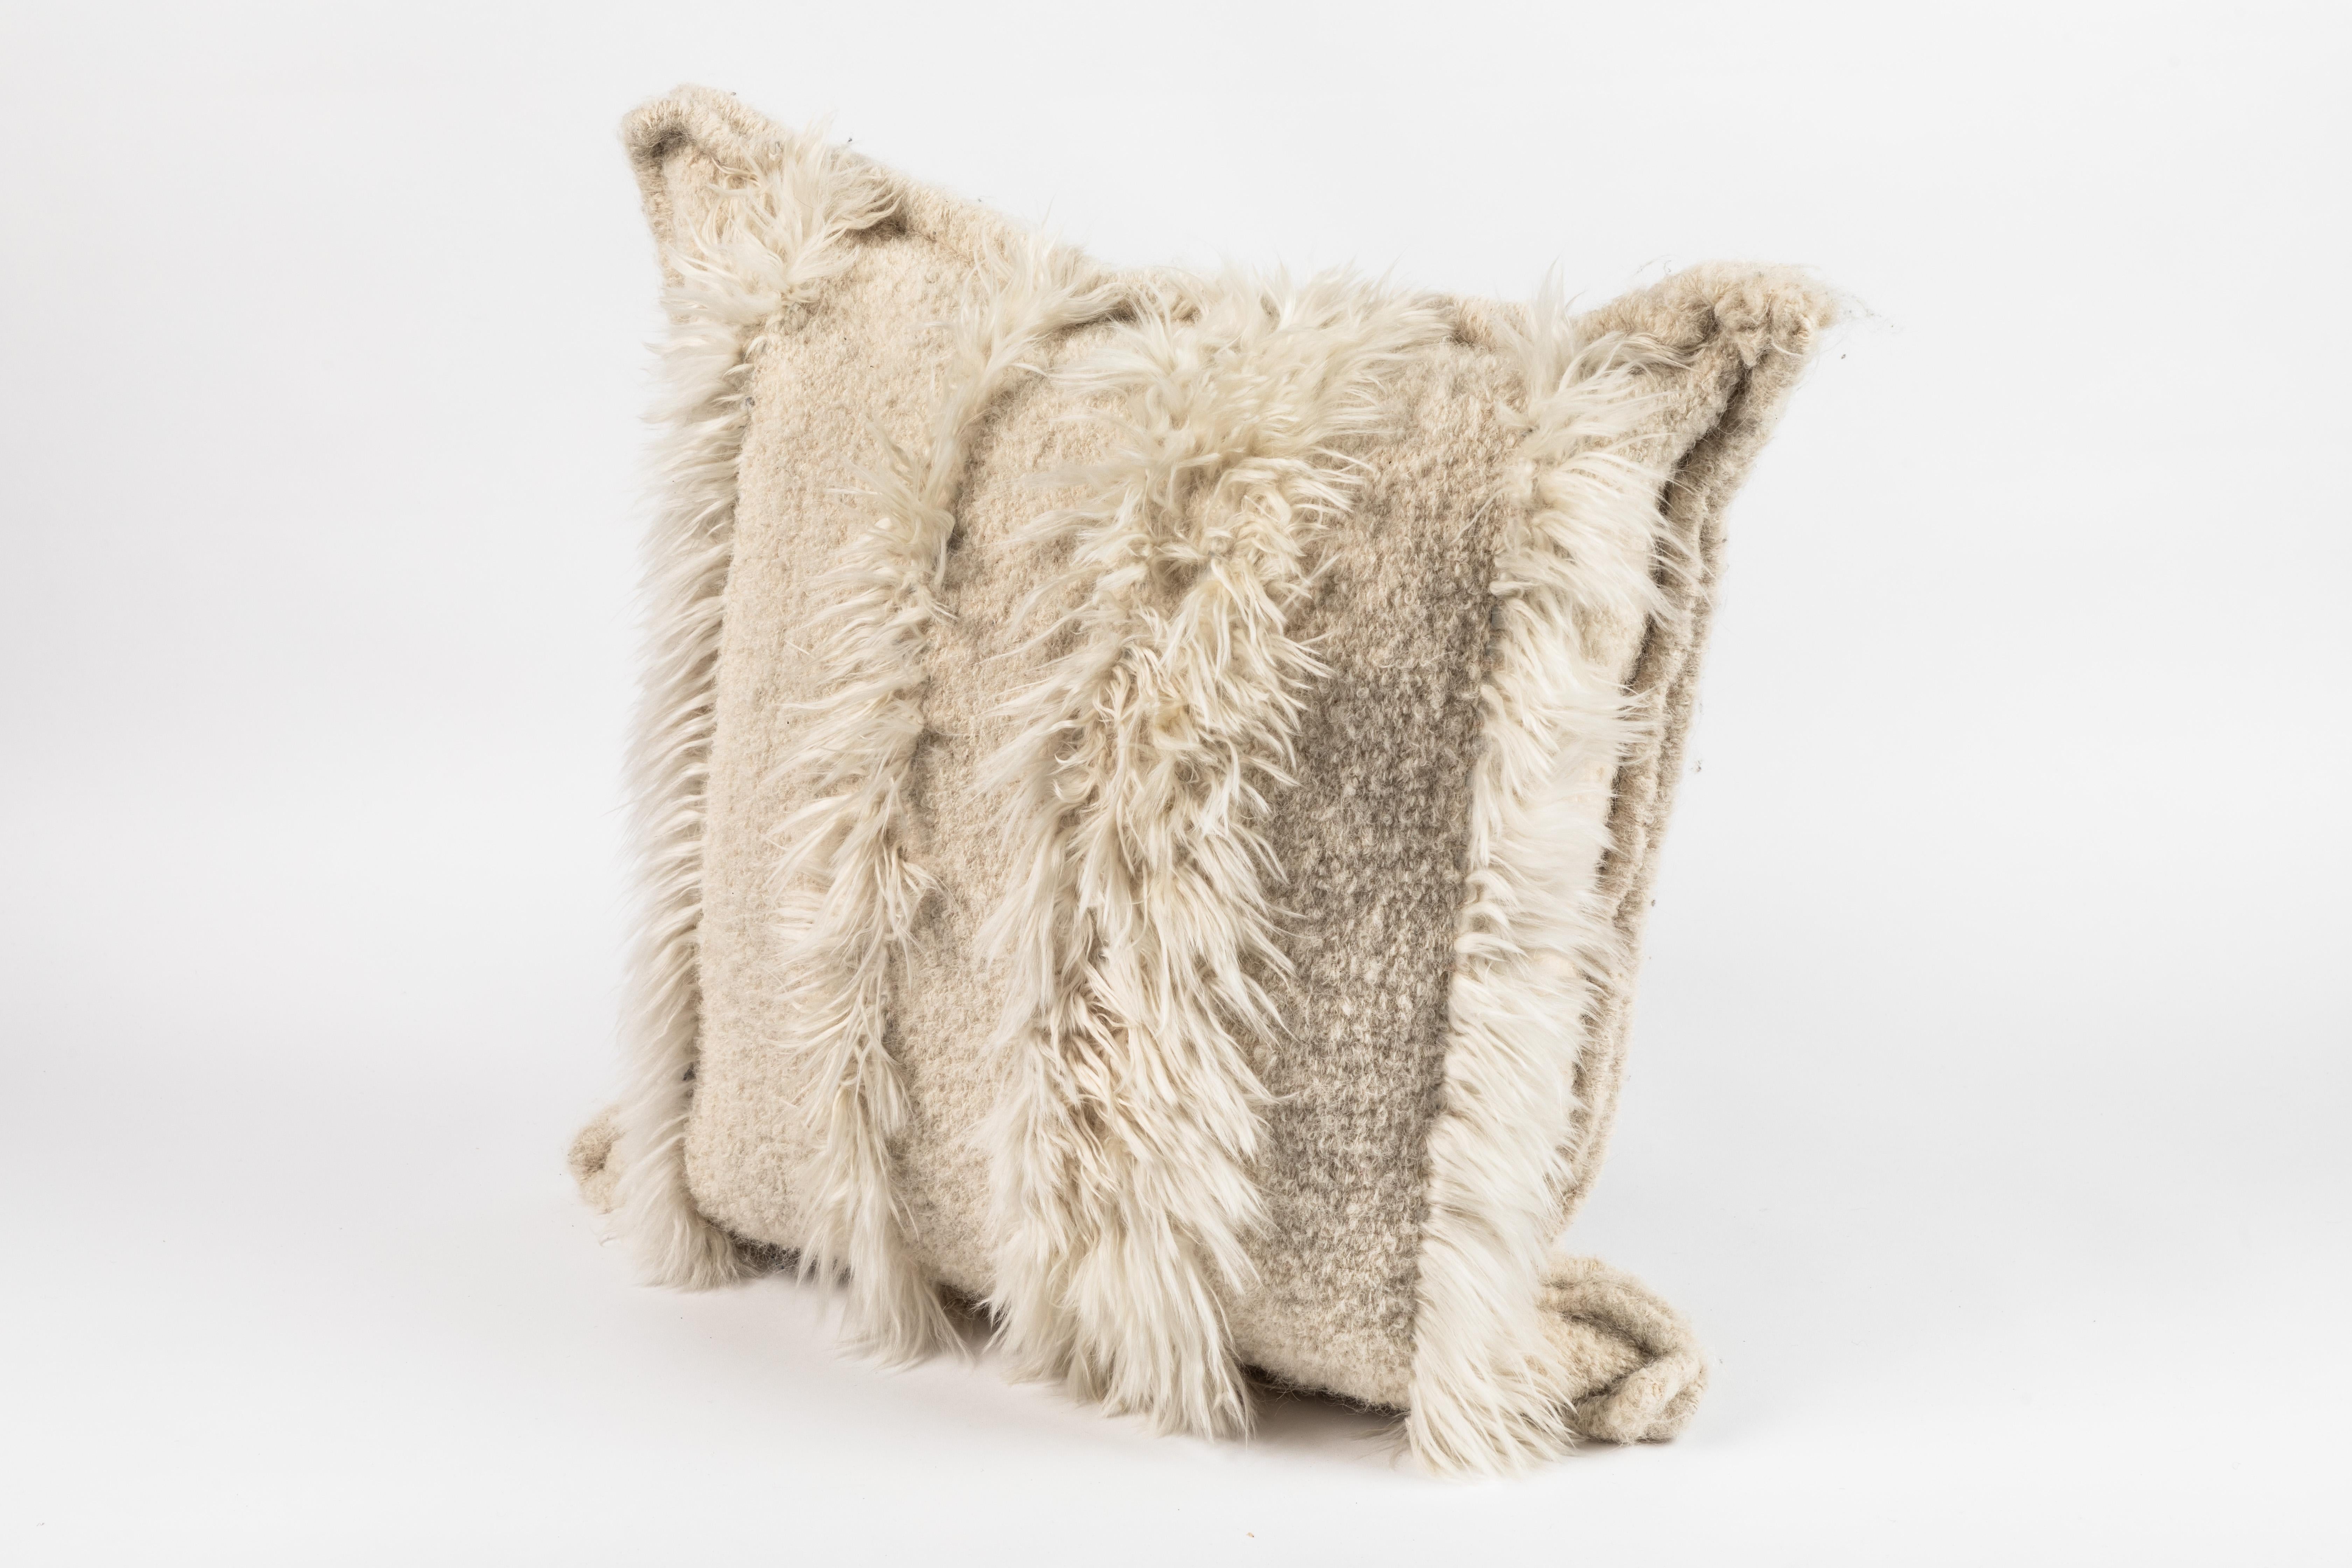 Peruvian alpaca bouclé and suri fur pillow by Rosemary Hallgarten. 

Originating from London, Rosemary Hallgarten is a second generation crafts person who designs and manufactures a luxurious collection of rugs, fabric, pillows and throws made